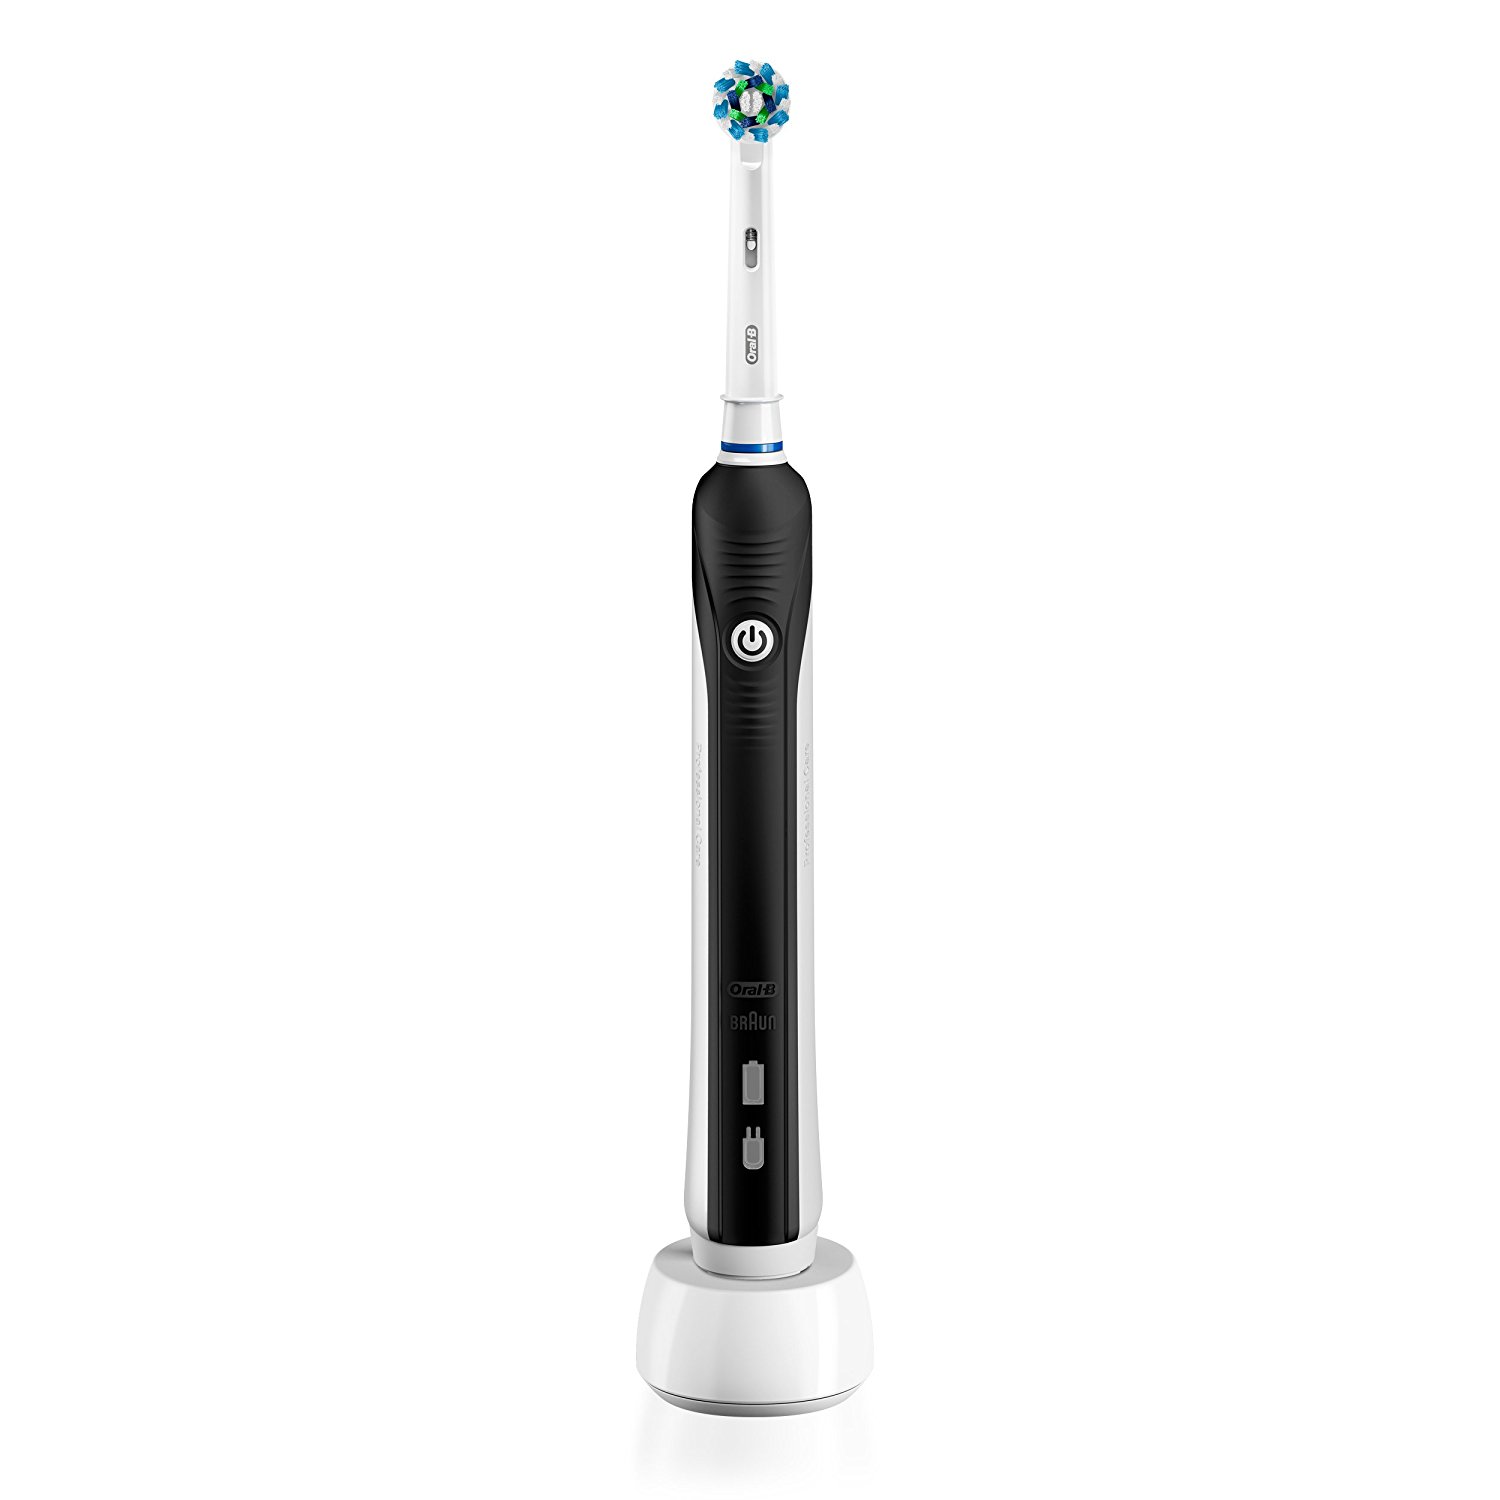 The Oral-B Pro 1000 Electric Toothbrush isn't just for Dad's but will help Dad get on the right side of oral hygiene. <br/><br/> You can pick this up at  <a href="https://amzn.to/2LeSlL2">Amazon for about $39.94</a>.